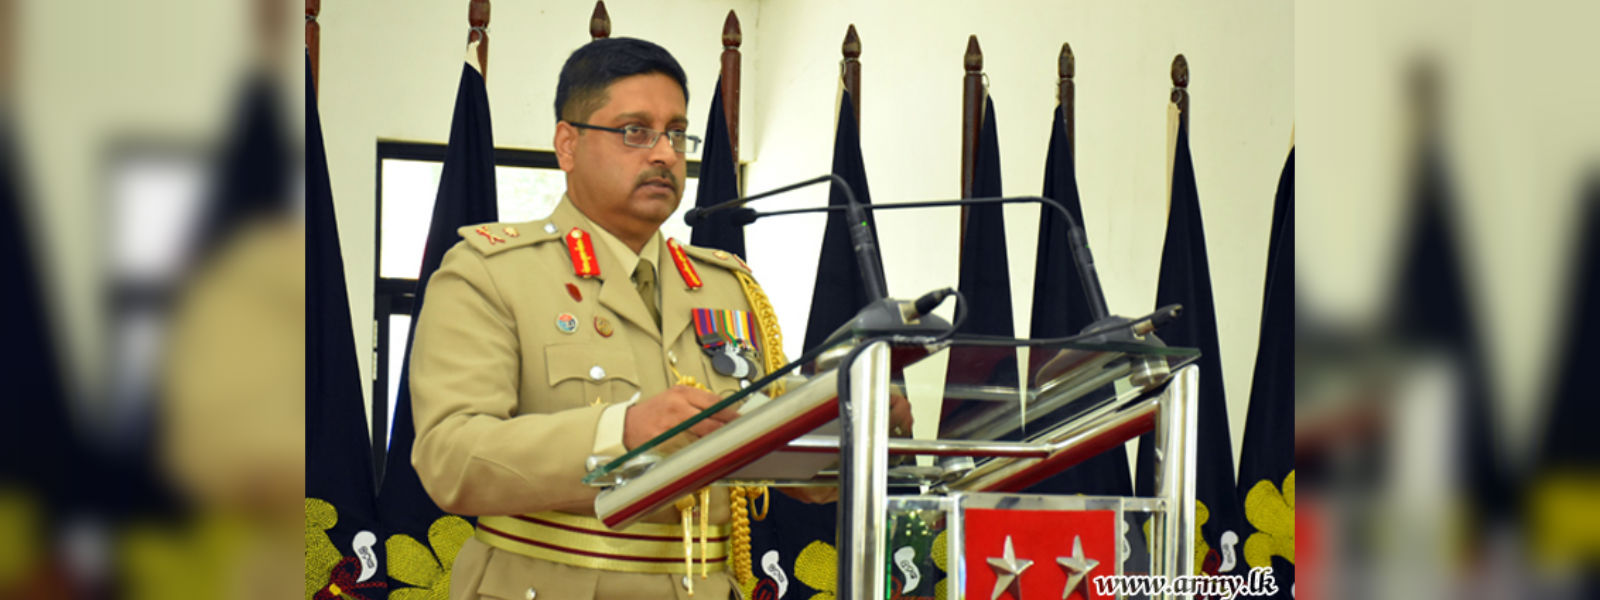 Major General Ruwan Kulatunga appointed as the Chief of State Intelligence